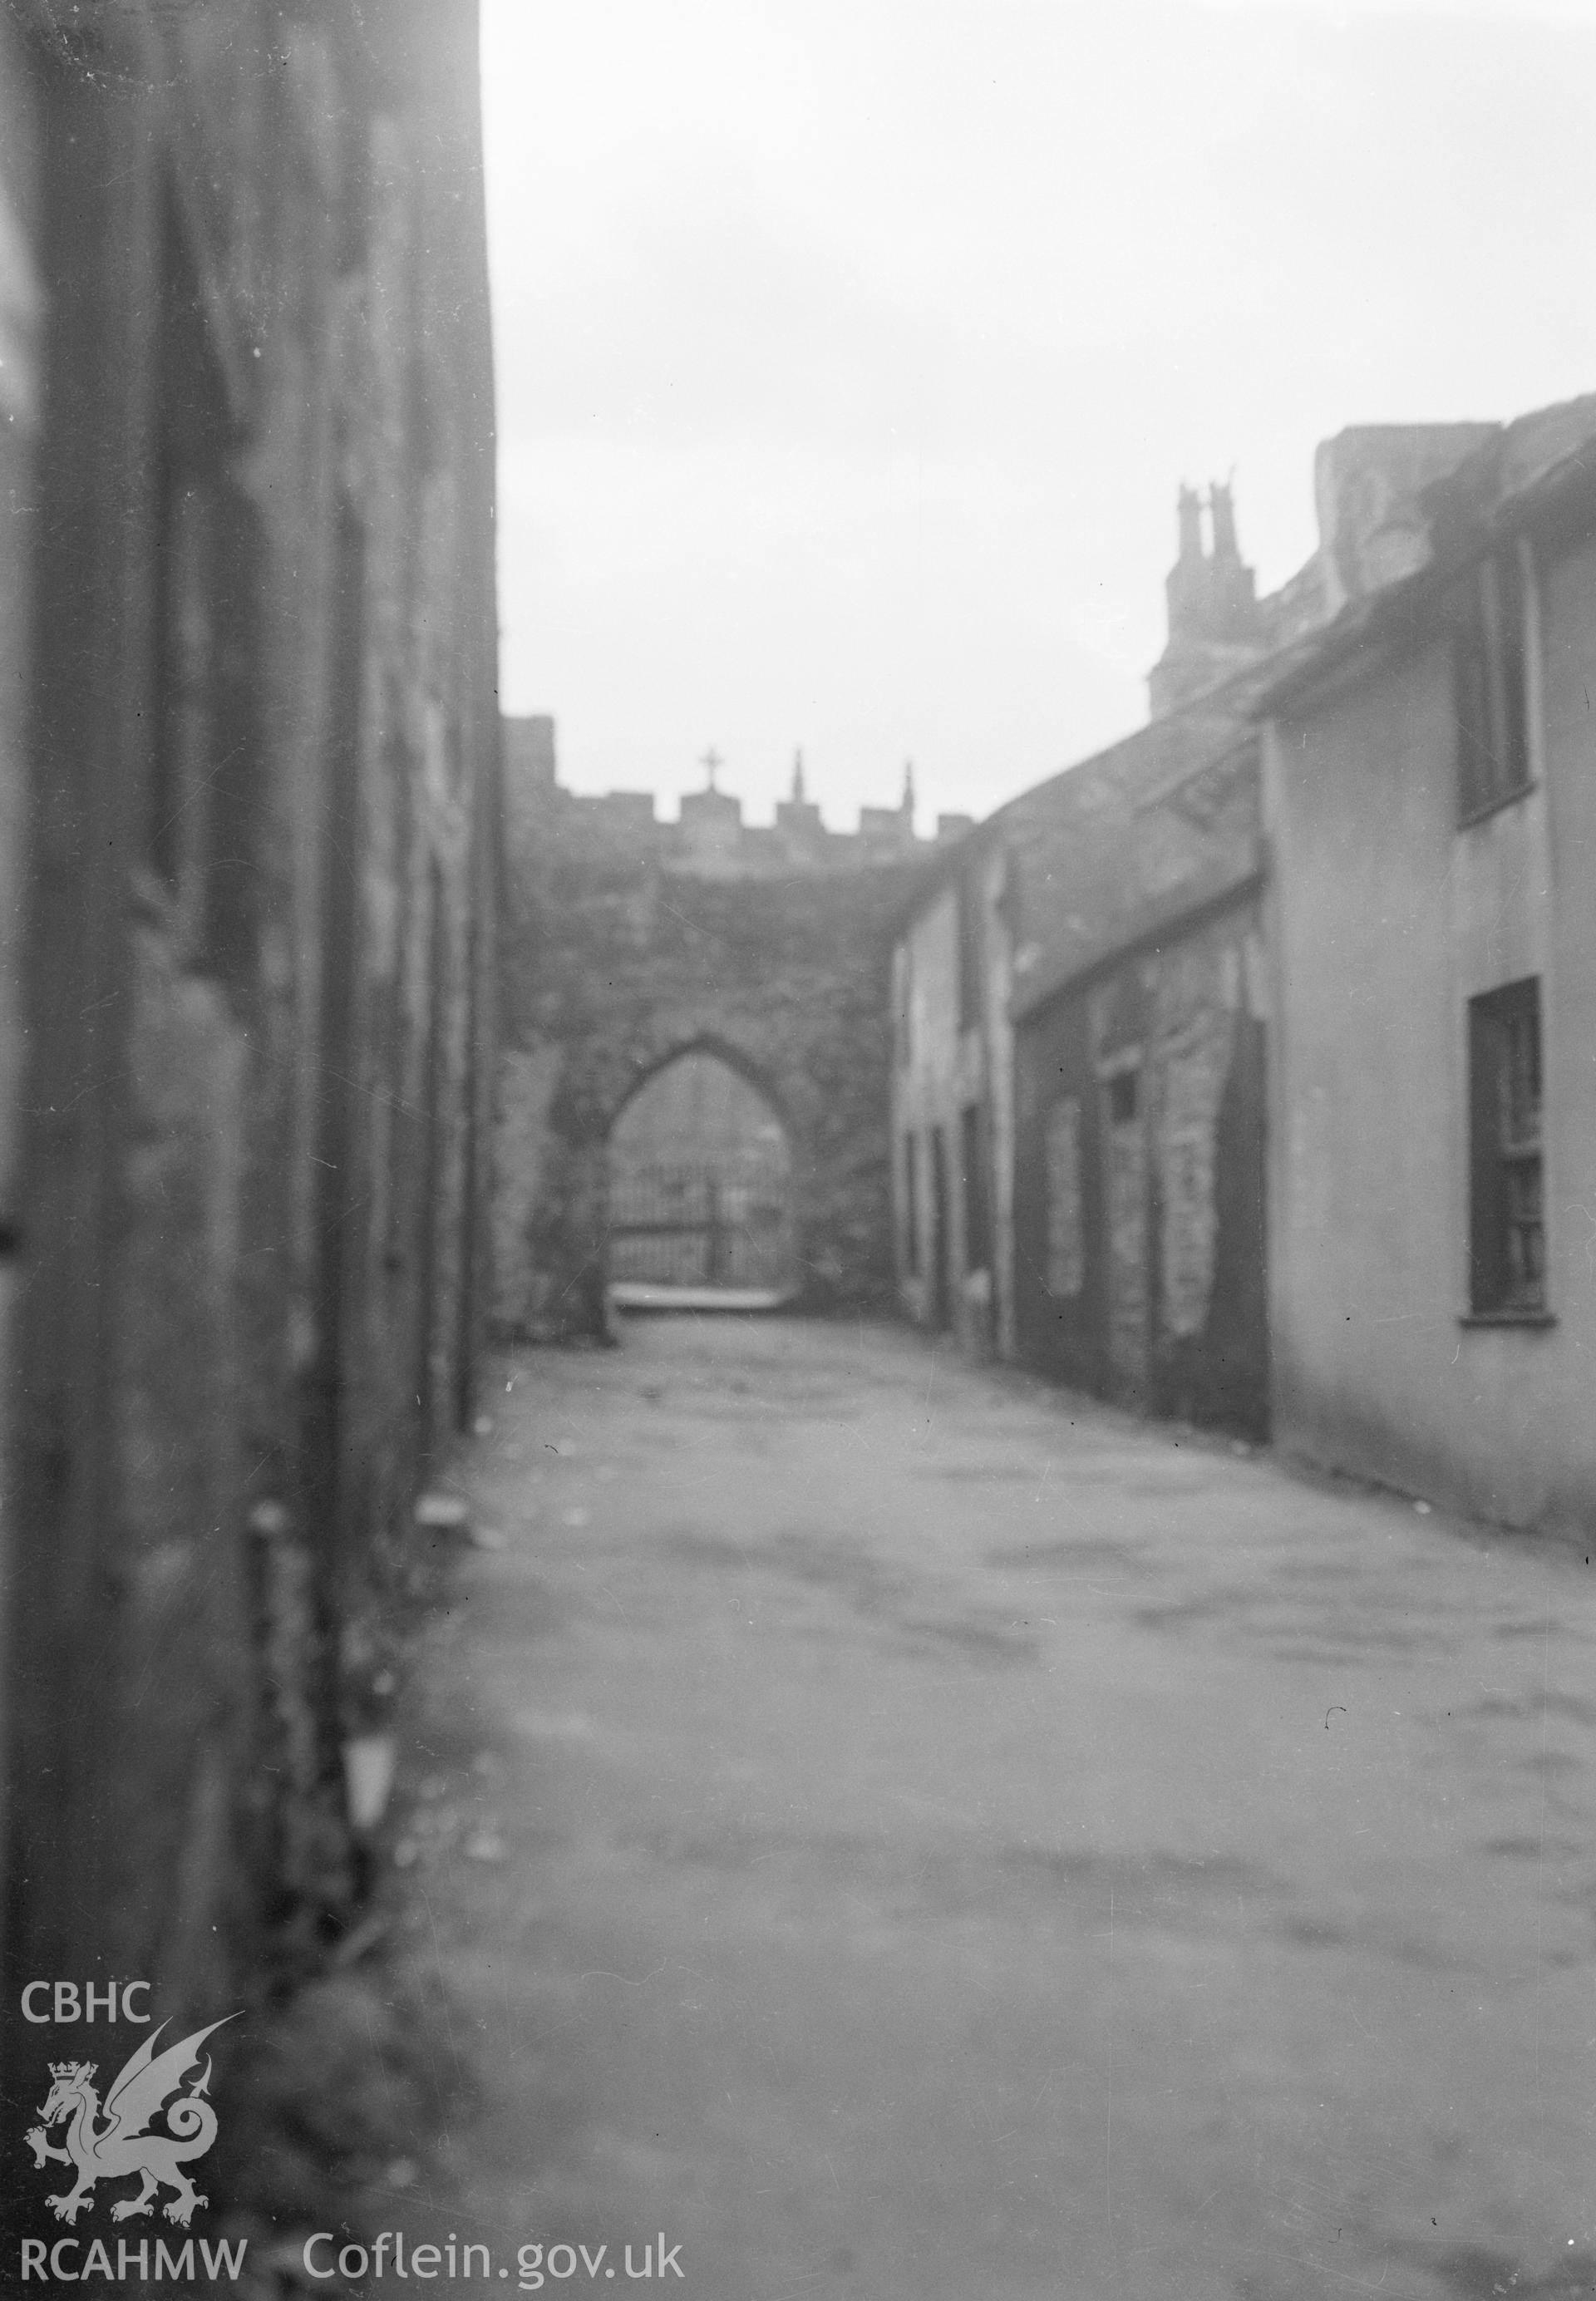 Digital copy of a nitrate negative showing view of Caer Gybi.